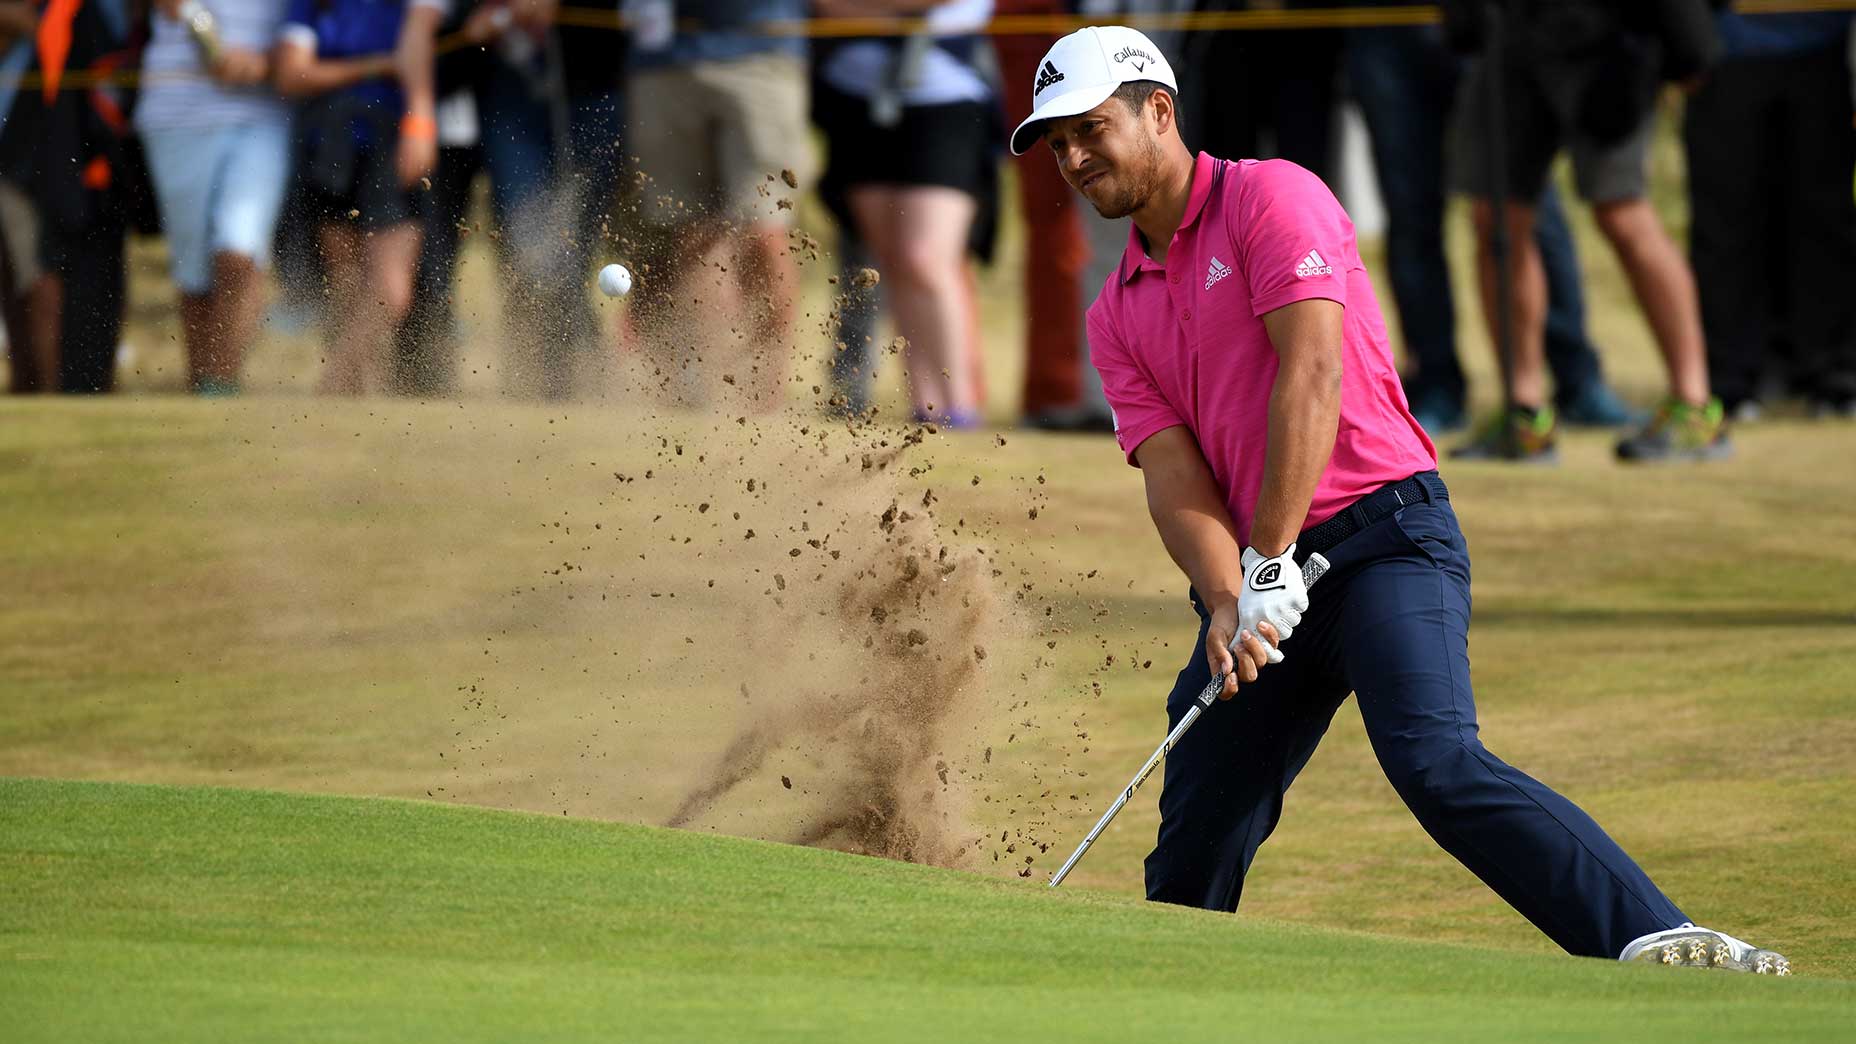 Xander Schauffele hits out of a bunker during the final round of the 2018 Open Championship.